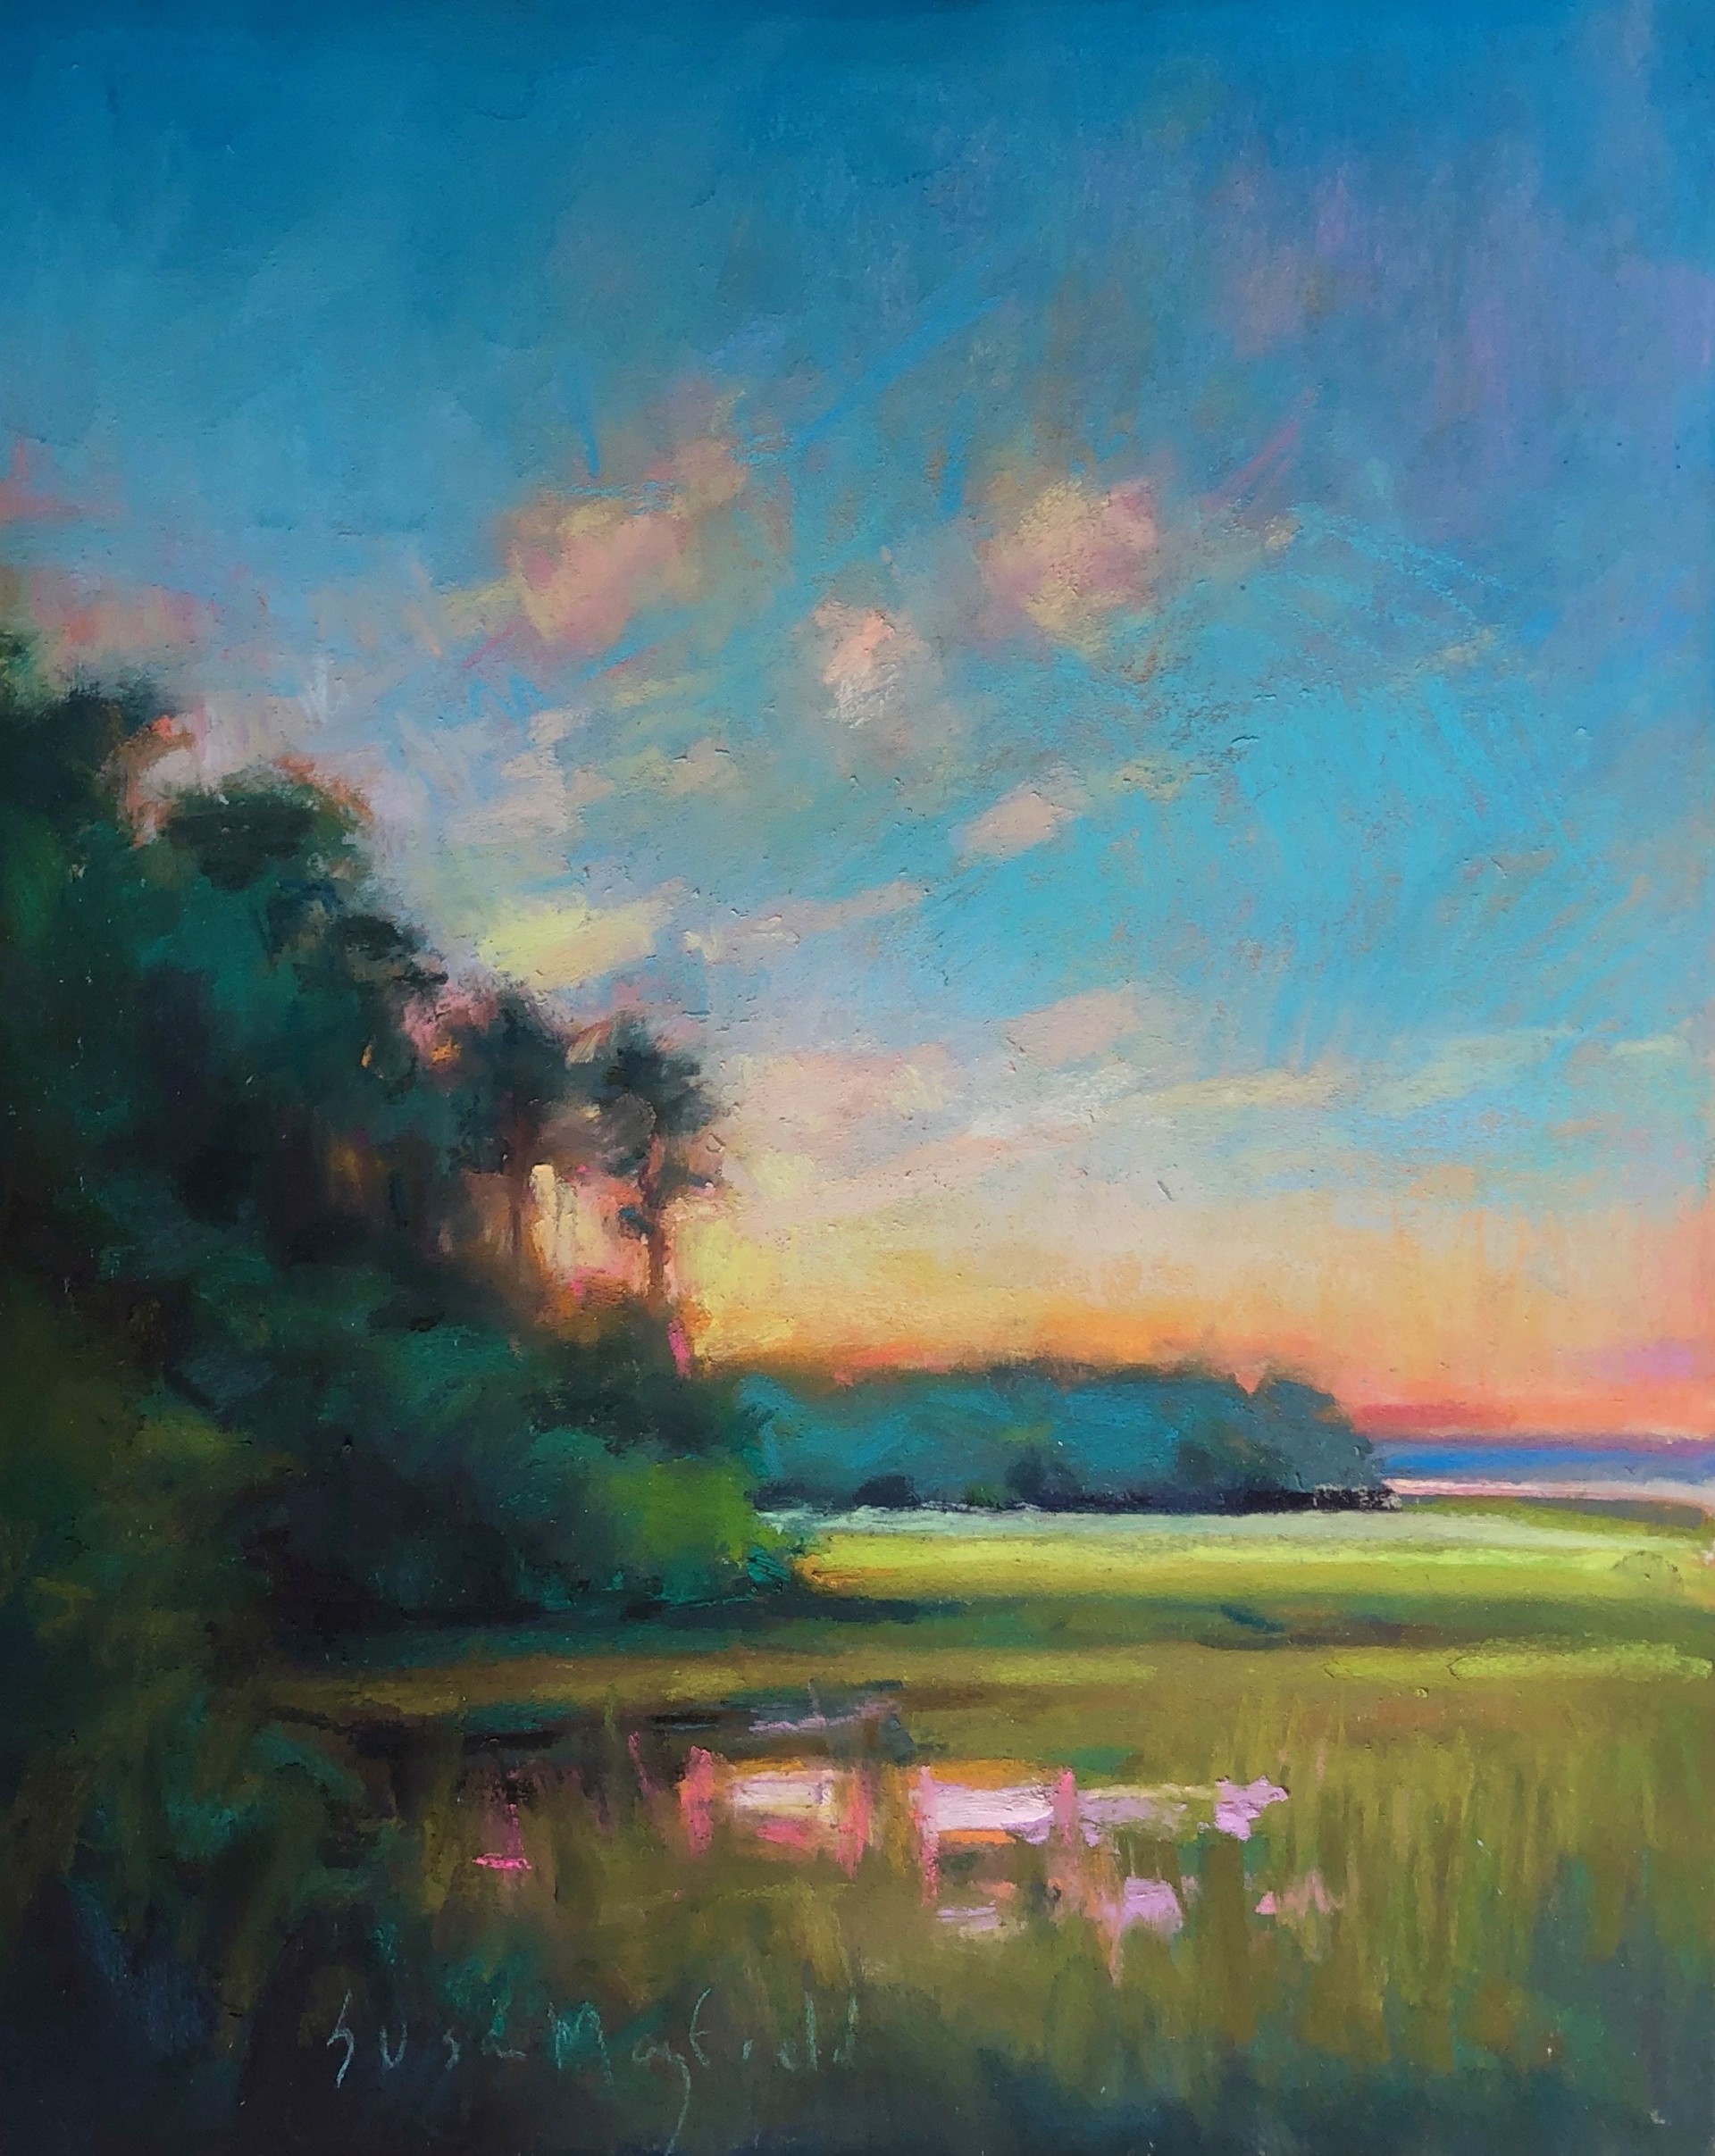 Marsh in Morning Light by Susan Mayfield